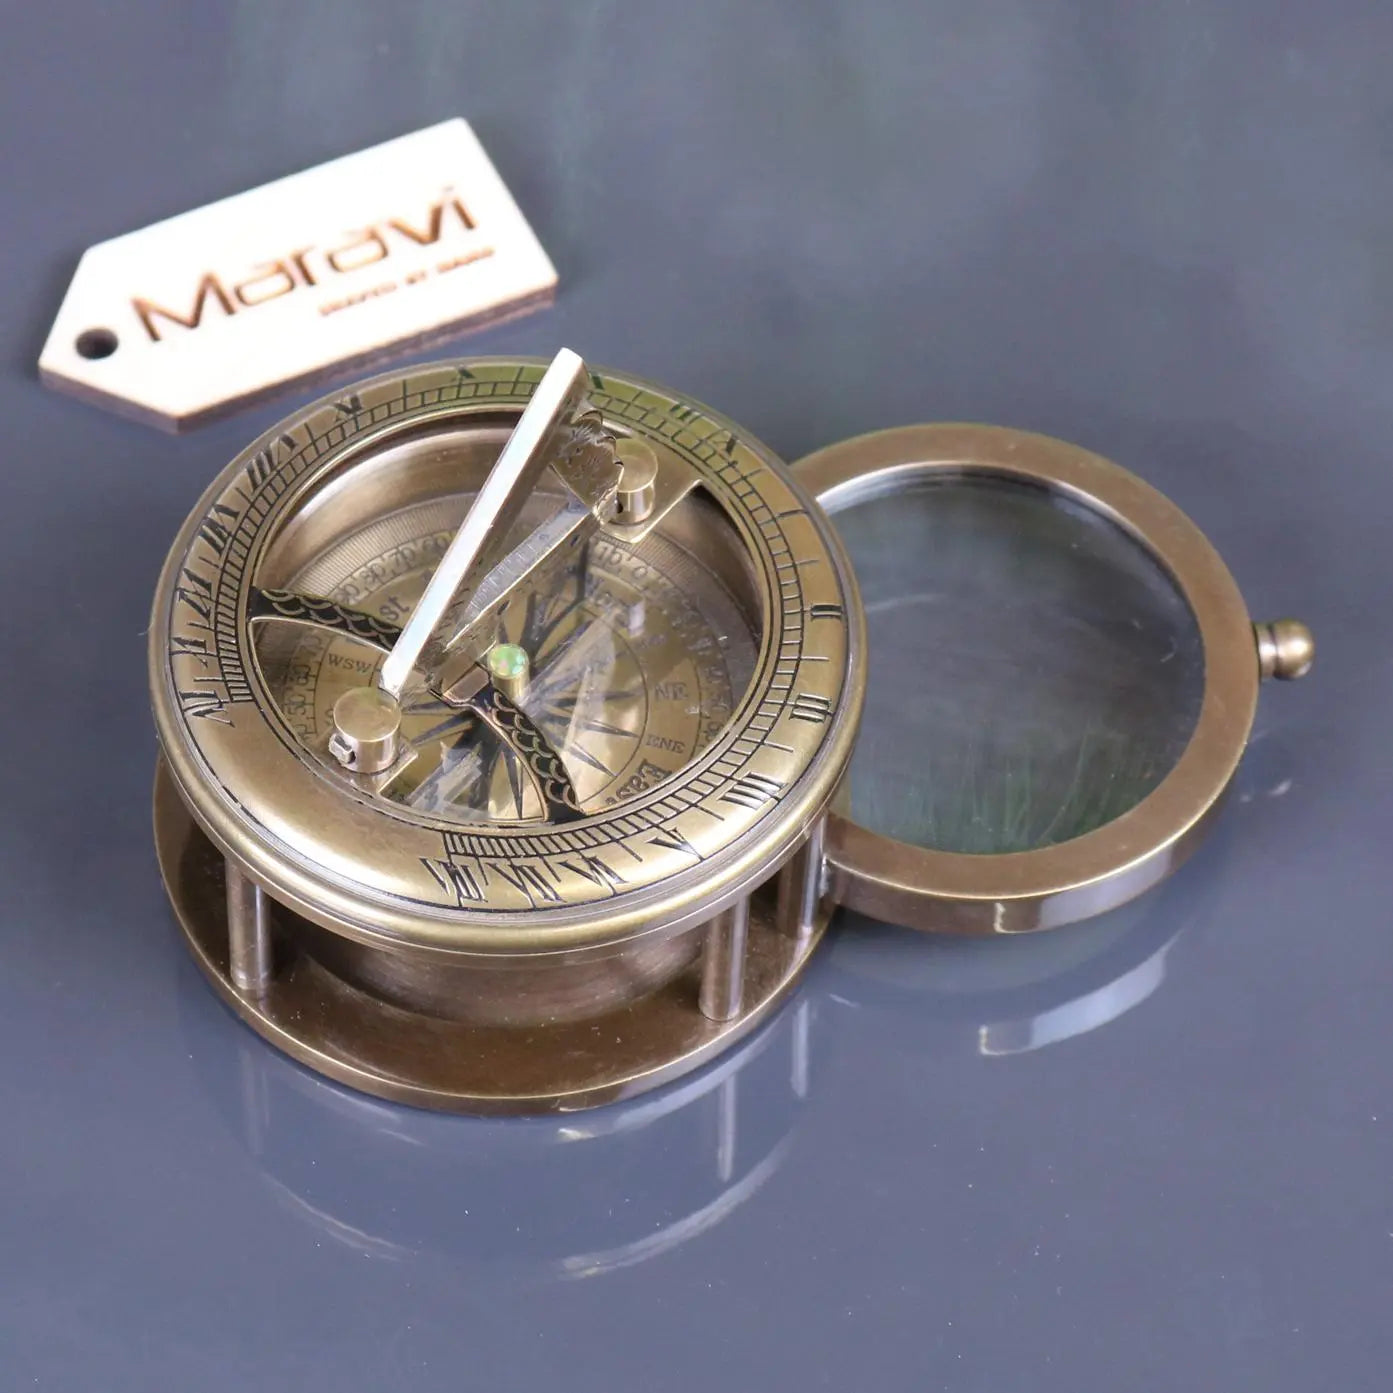 Lahna Pocket Compass with Sundial and Magnifier Top View